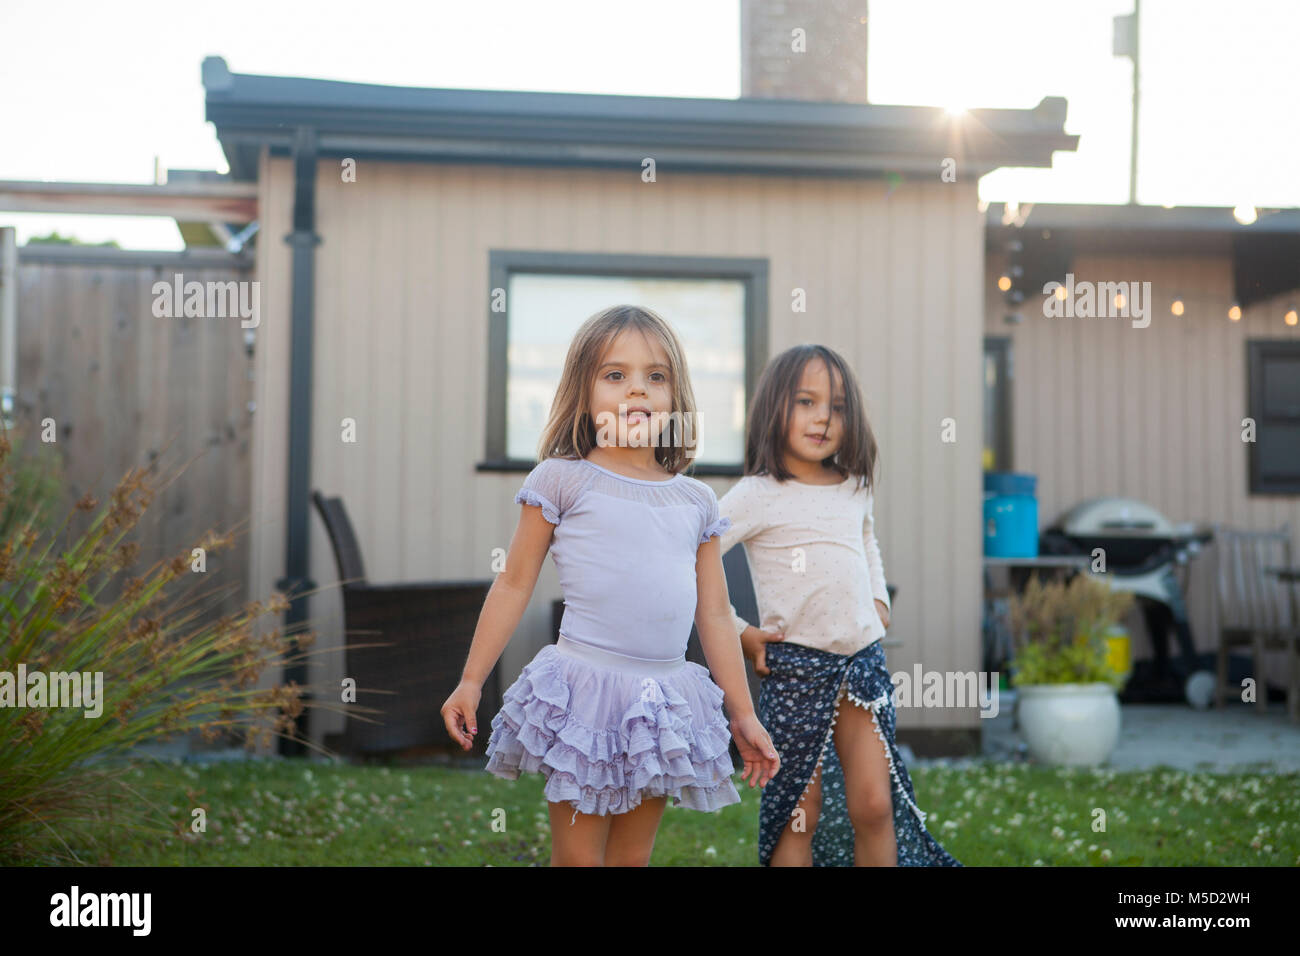 Portrait girl sisters in skirts in yard Stock Photo